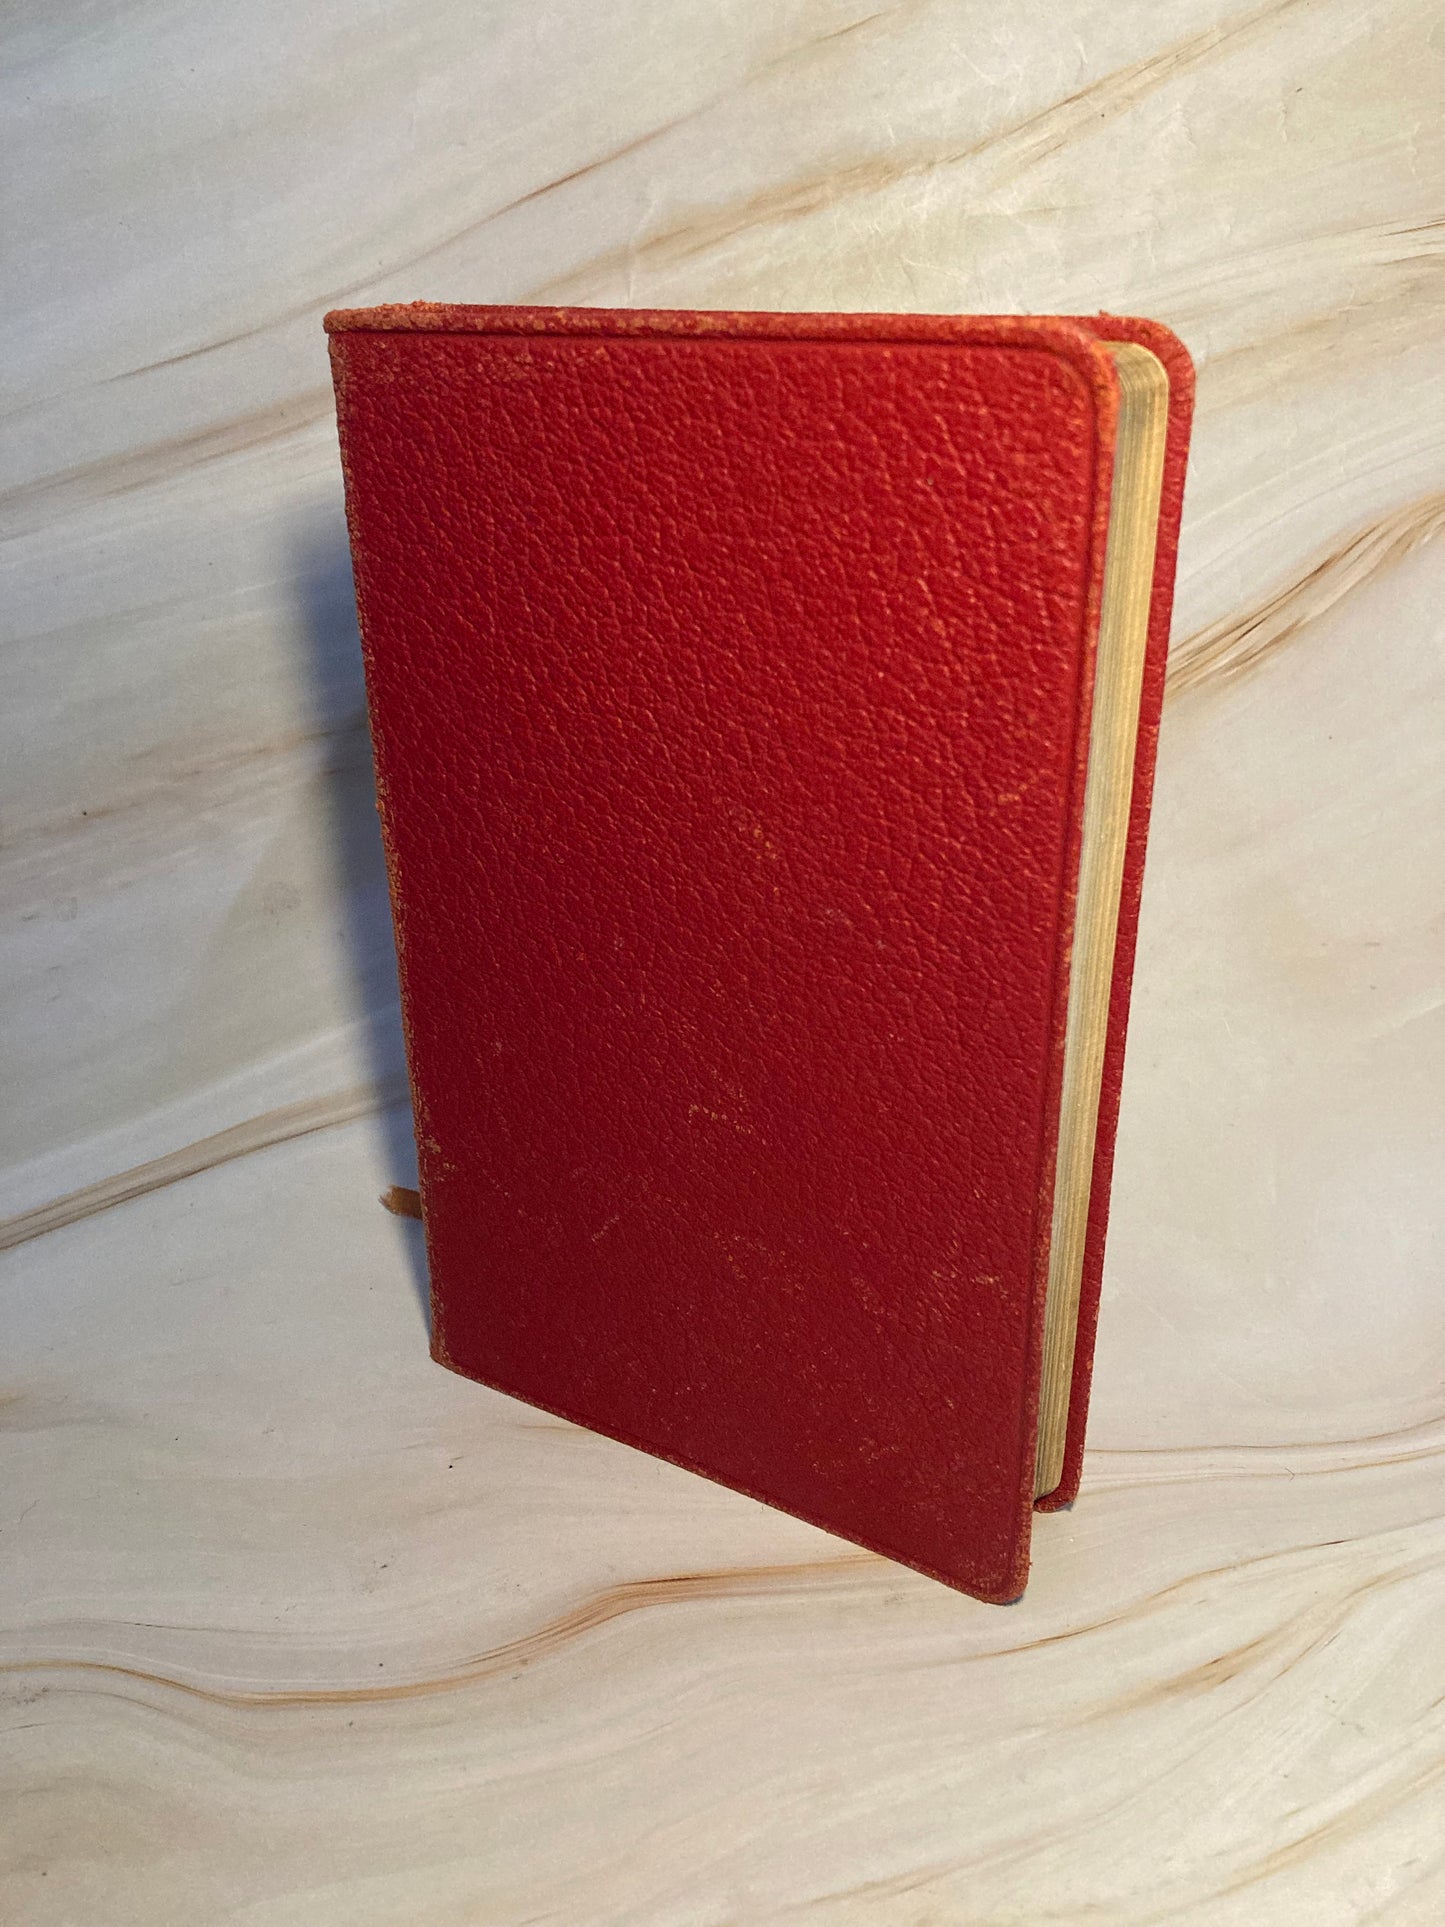 1961 The New English Bible New Testament Vintage Bible - (Ref x214)